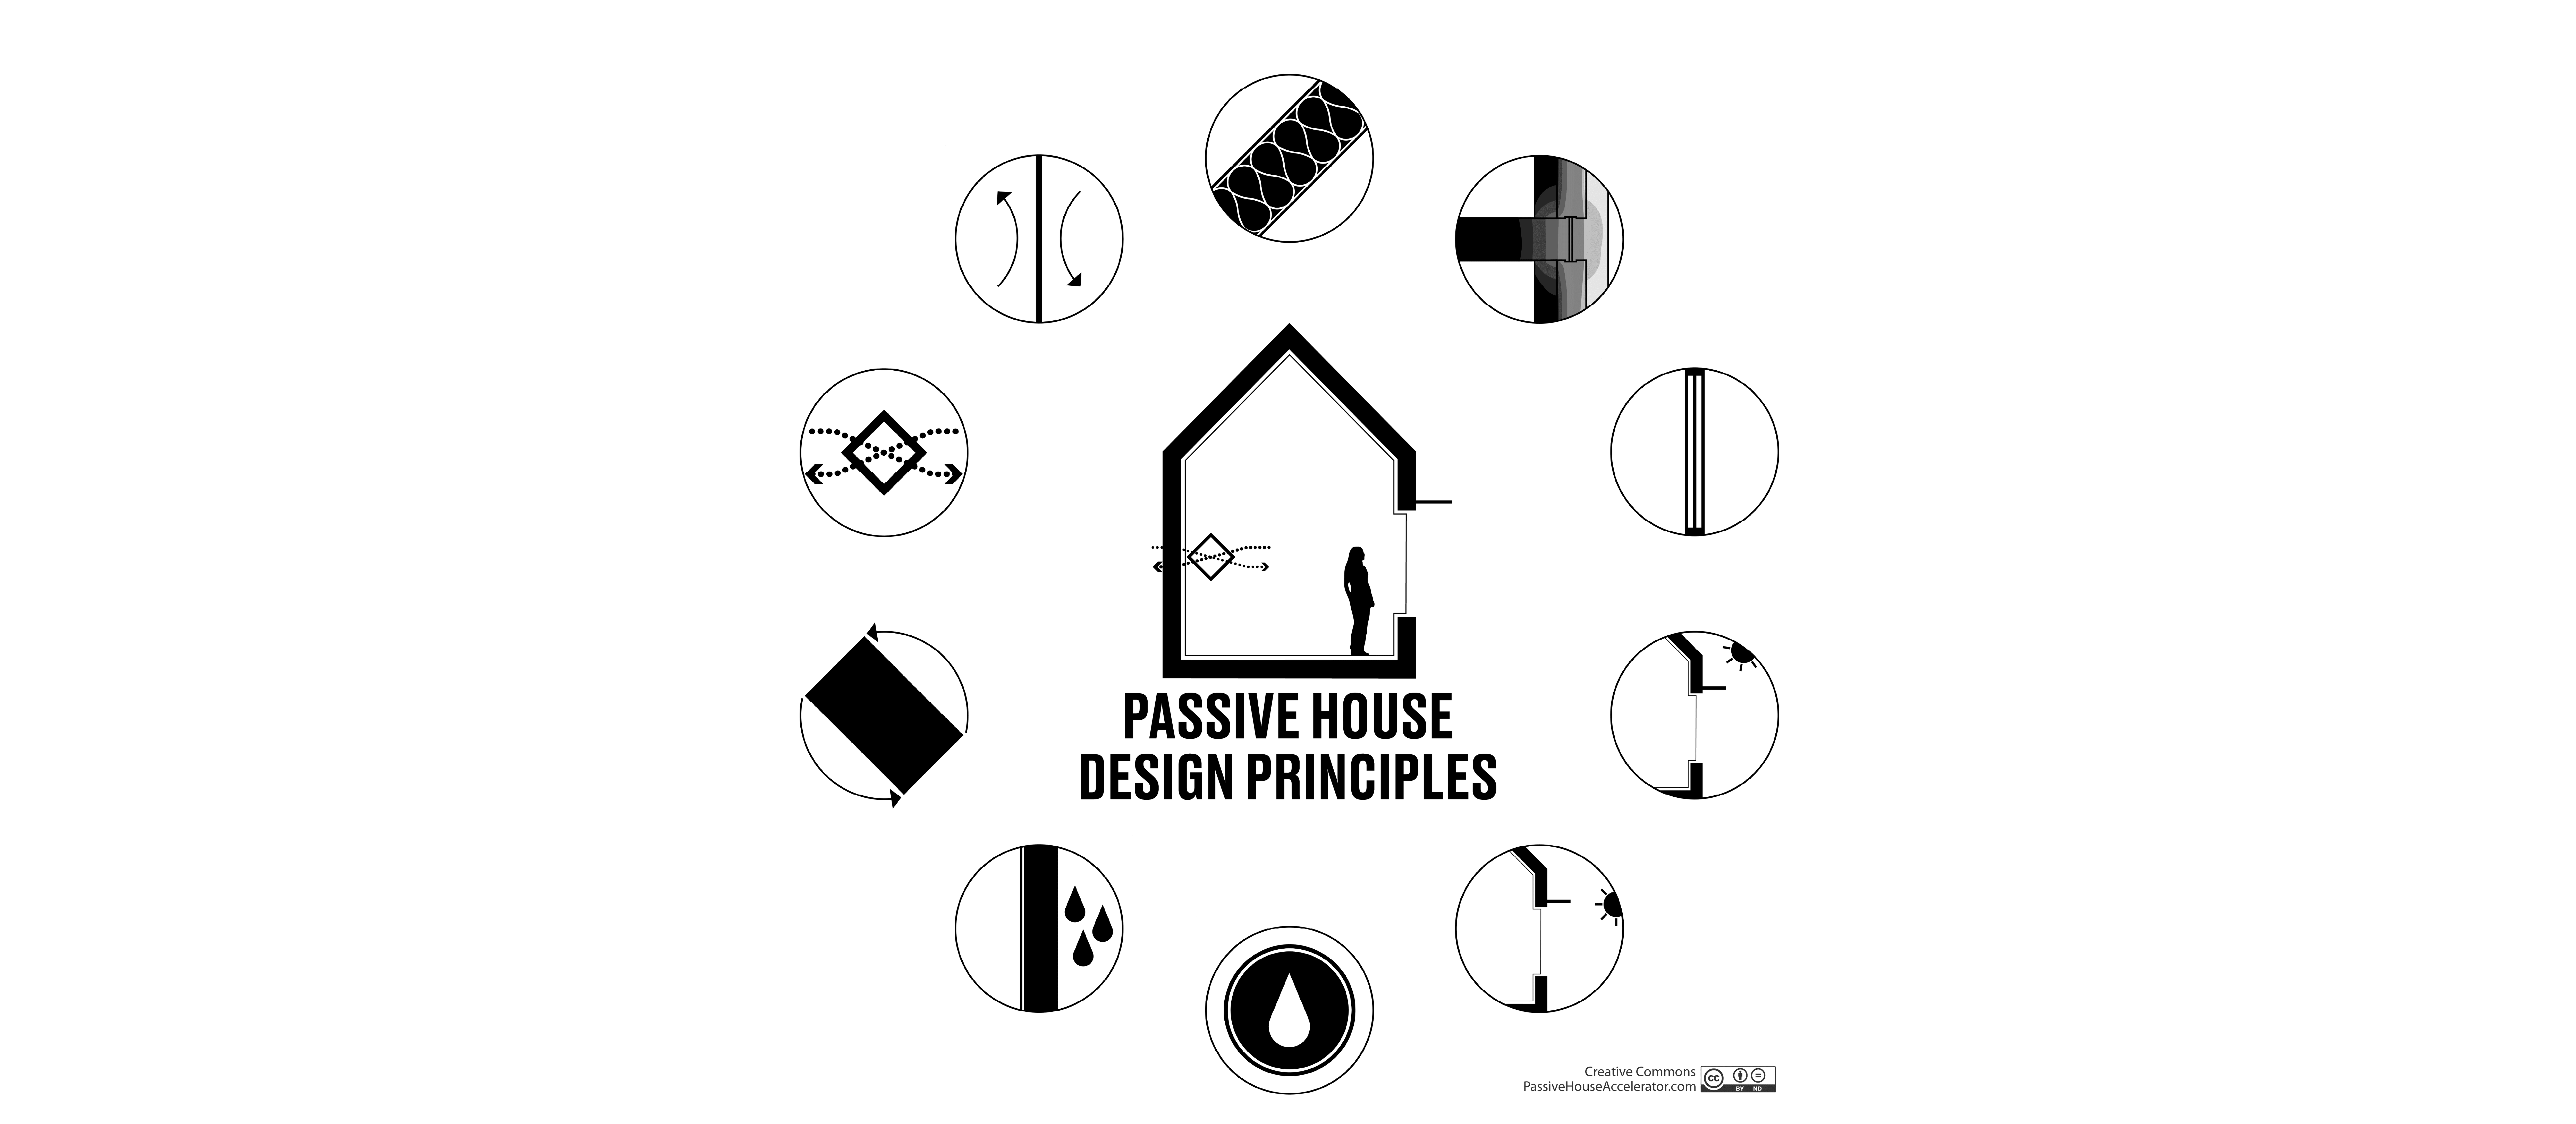 passing house principles graphic